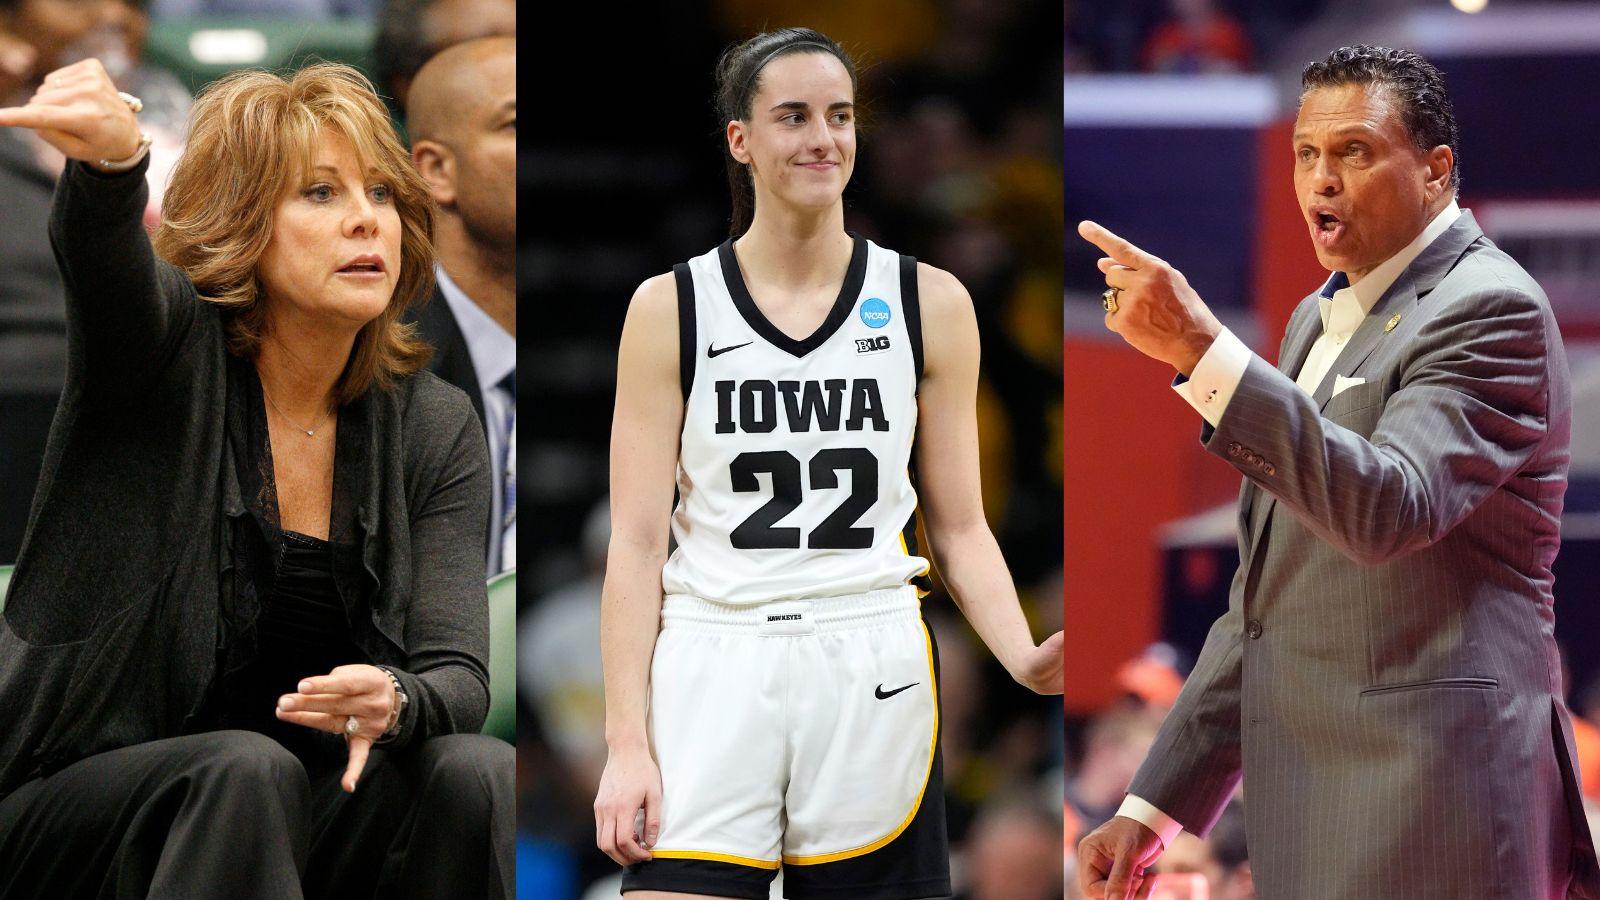 Nancy Lieberman (left), Caitlin Clark as a member of the Iowa Hawkeyes (center), and Reggie Theus (right).